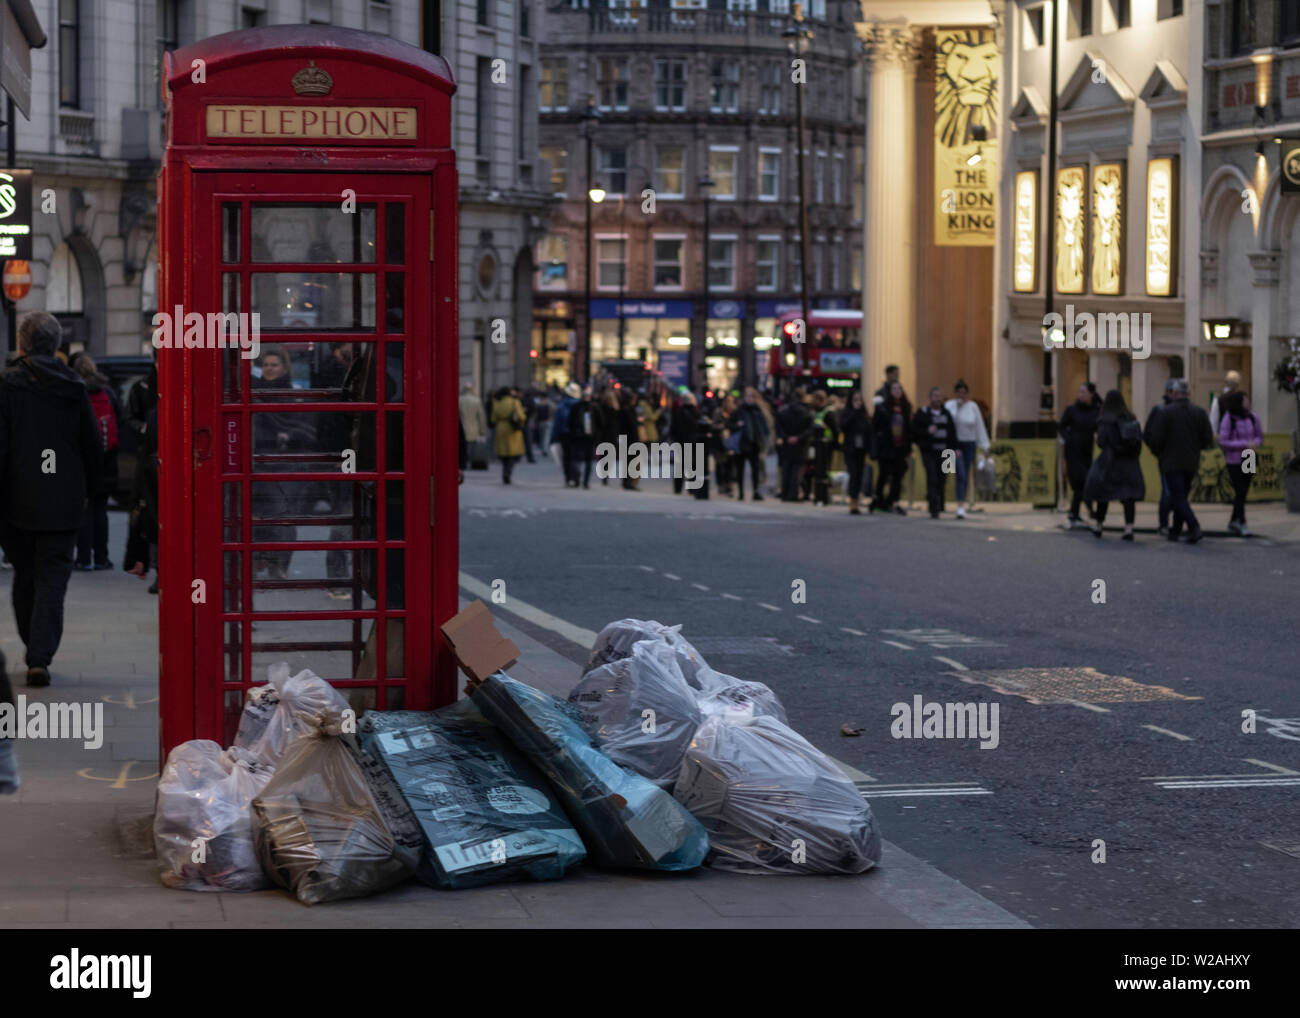 Rubbish bags on London streets next to red phone box Stock Photo